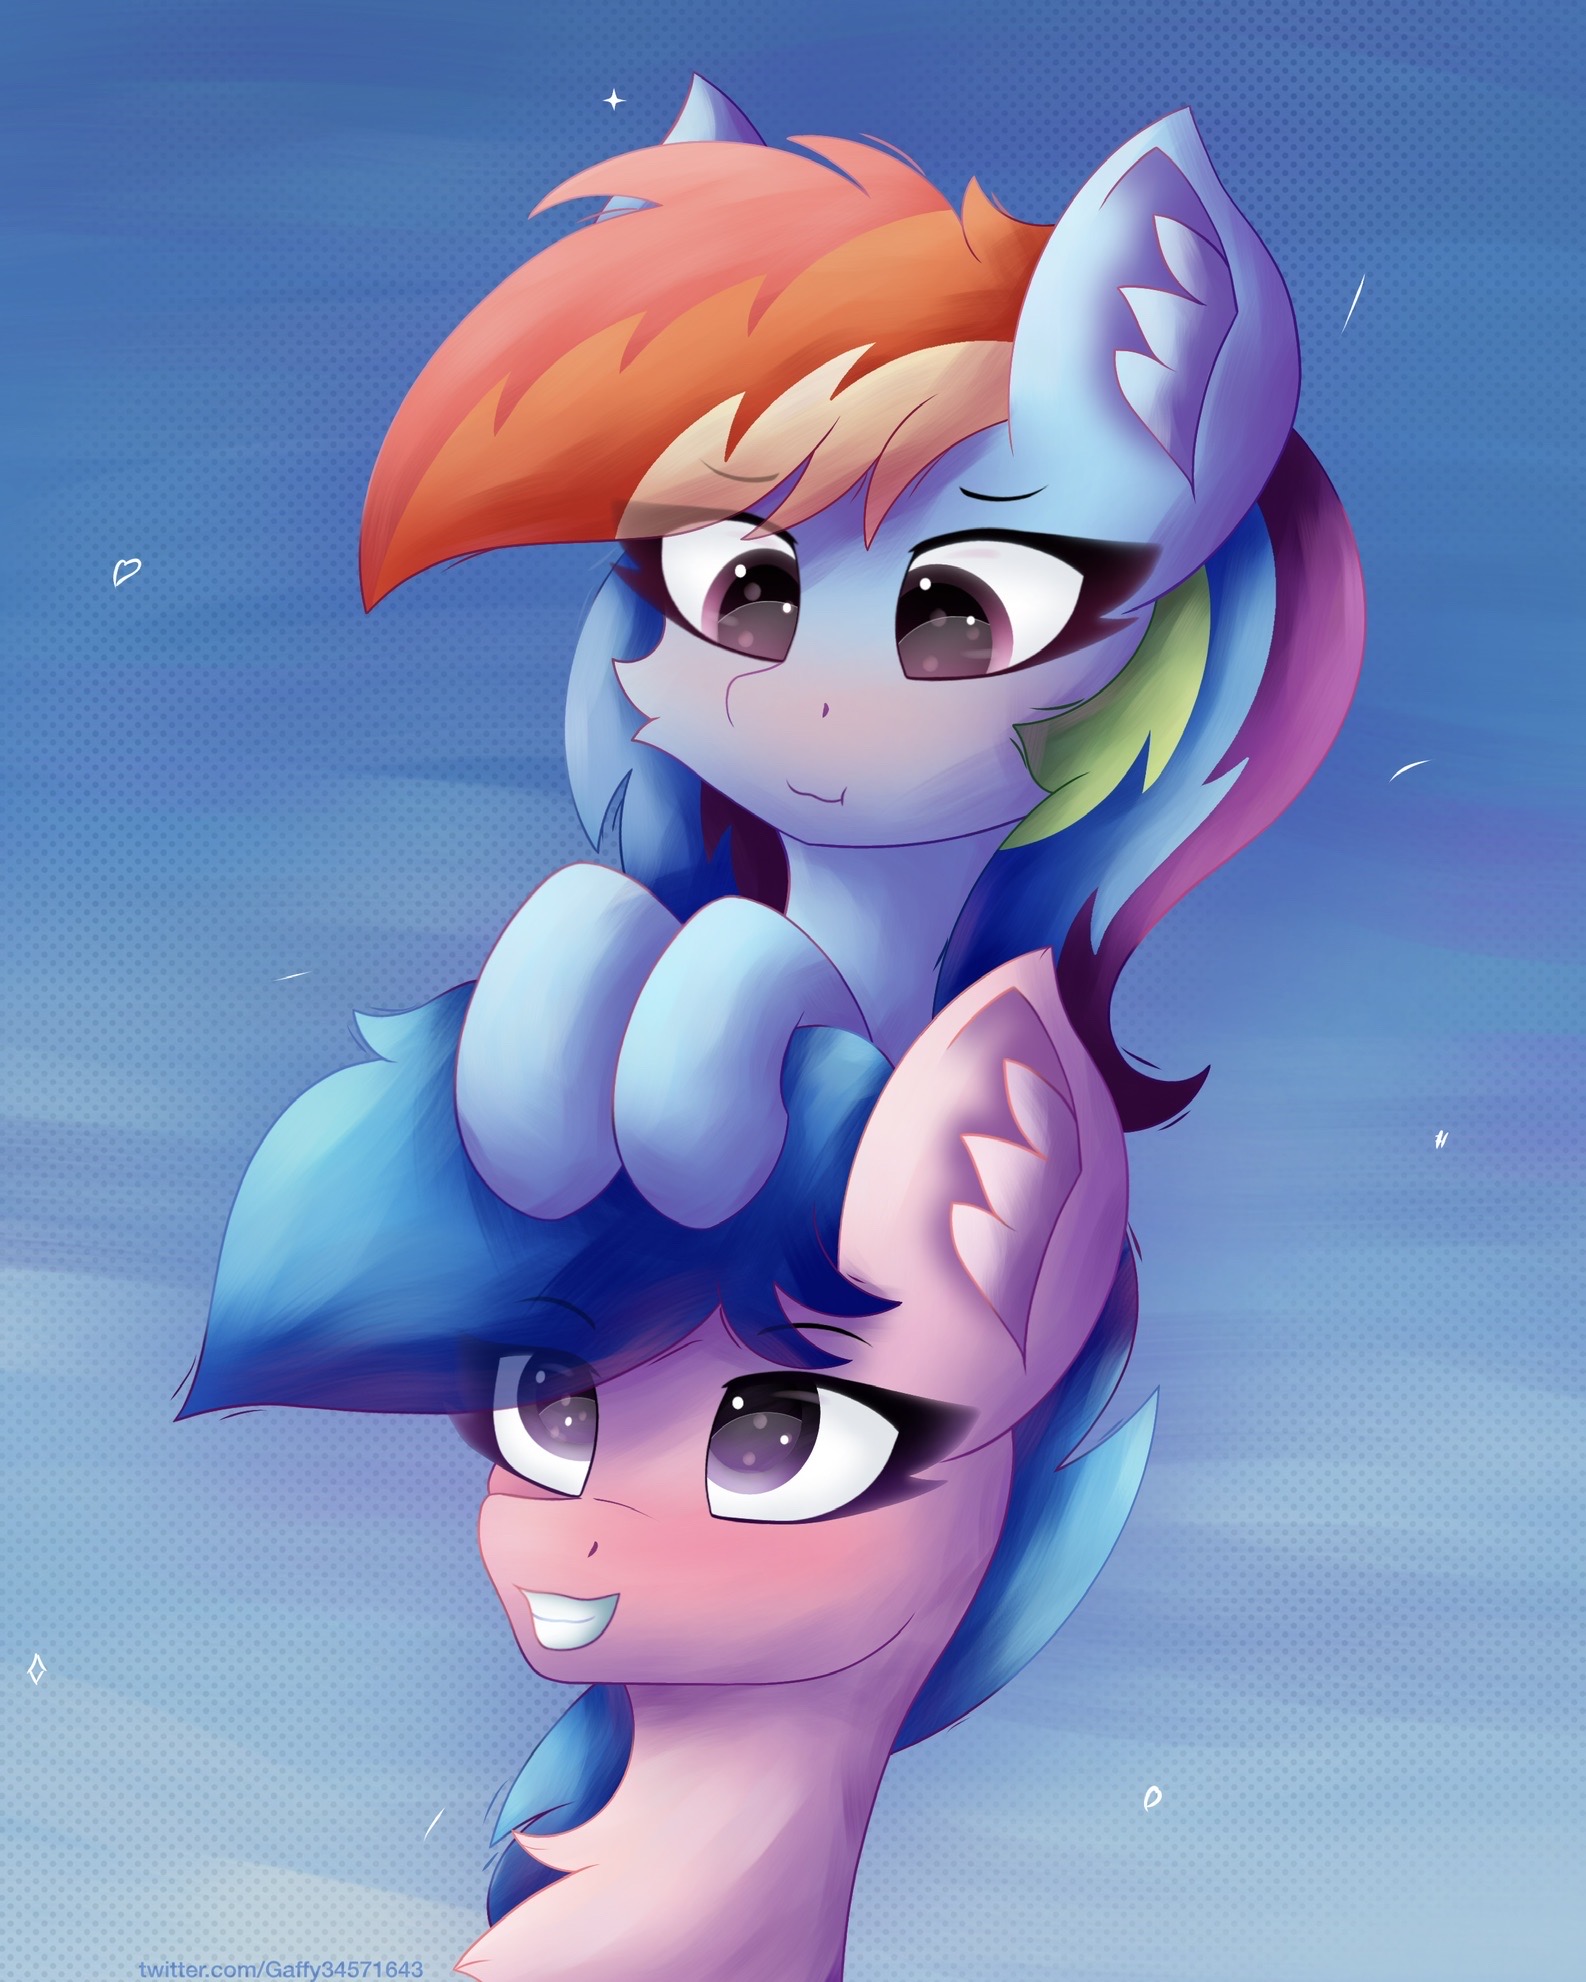 Rainbow Dash From My Little Pony Friendship Is Mag by SoffiMB on DeviantArt